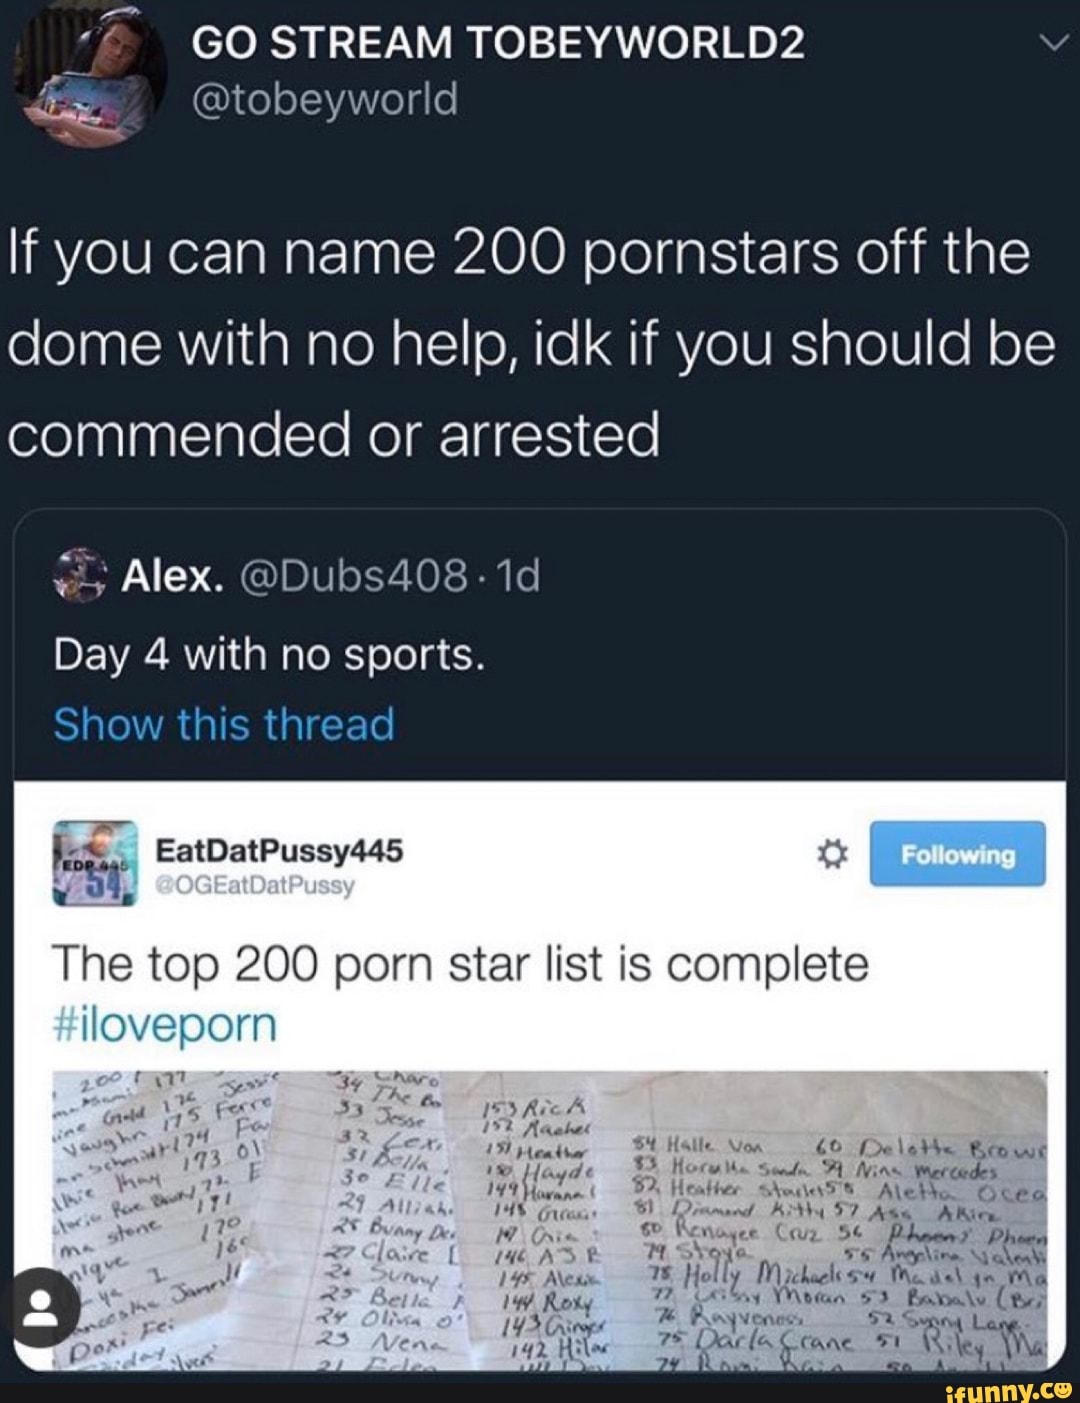 If you can name 200 pornstars off the dome with no help, idk if you should